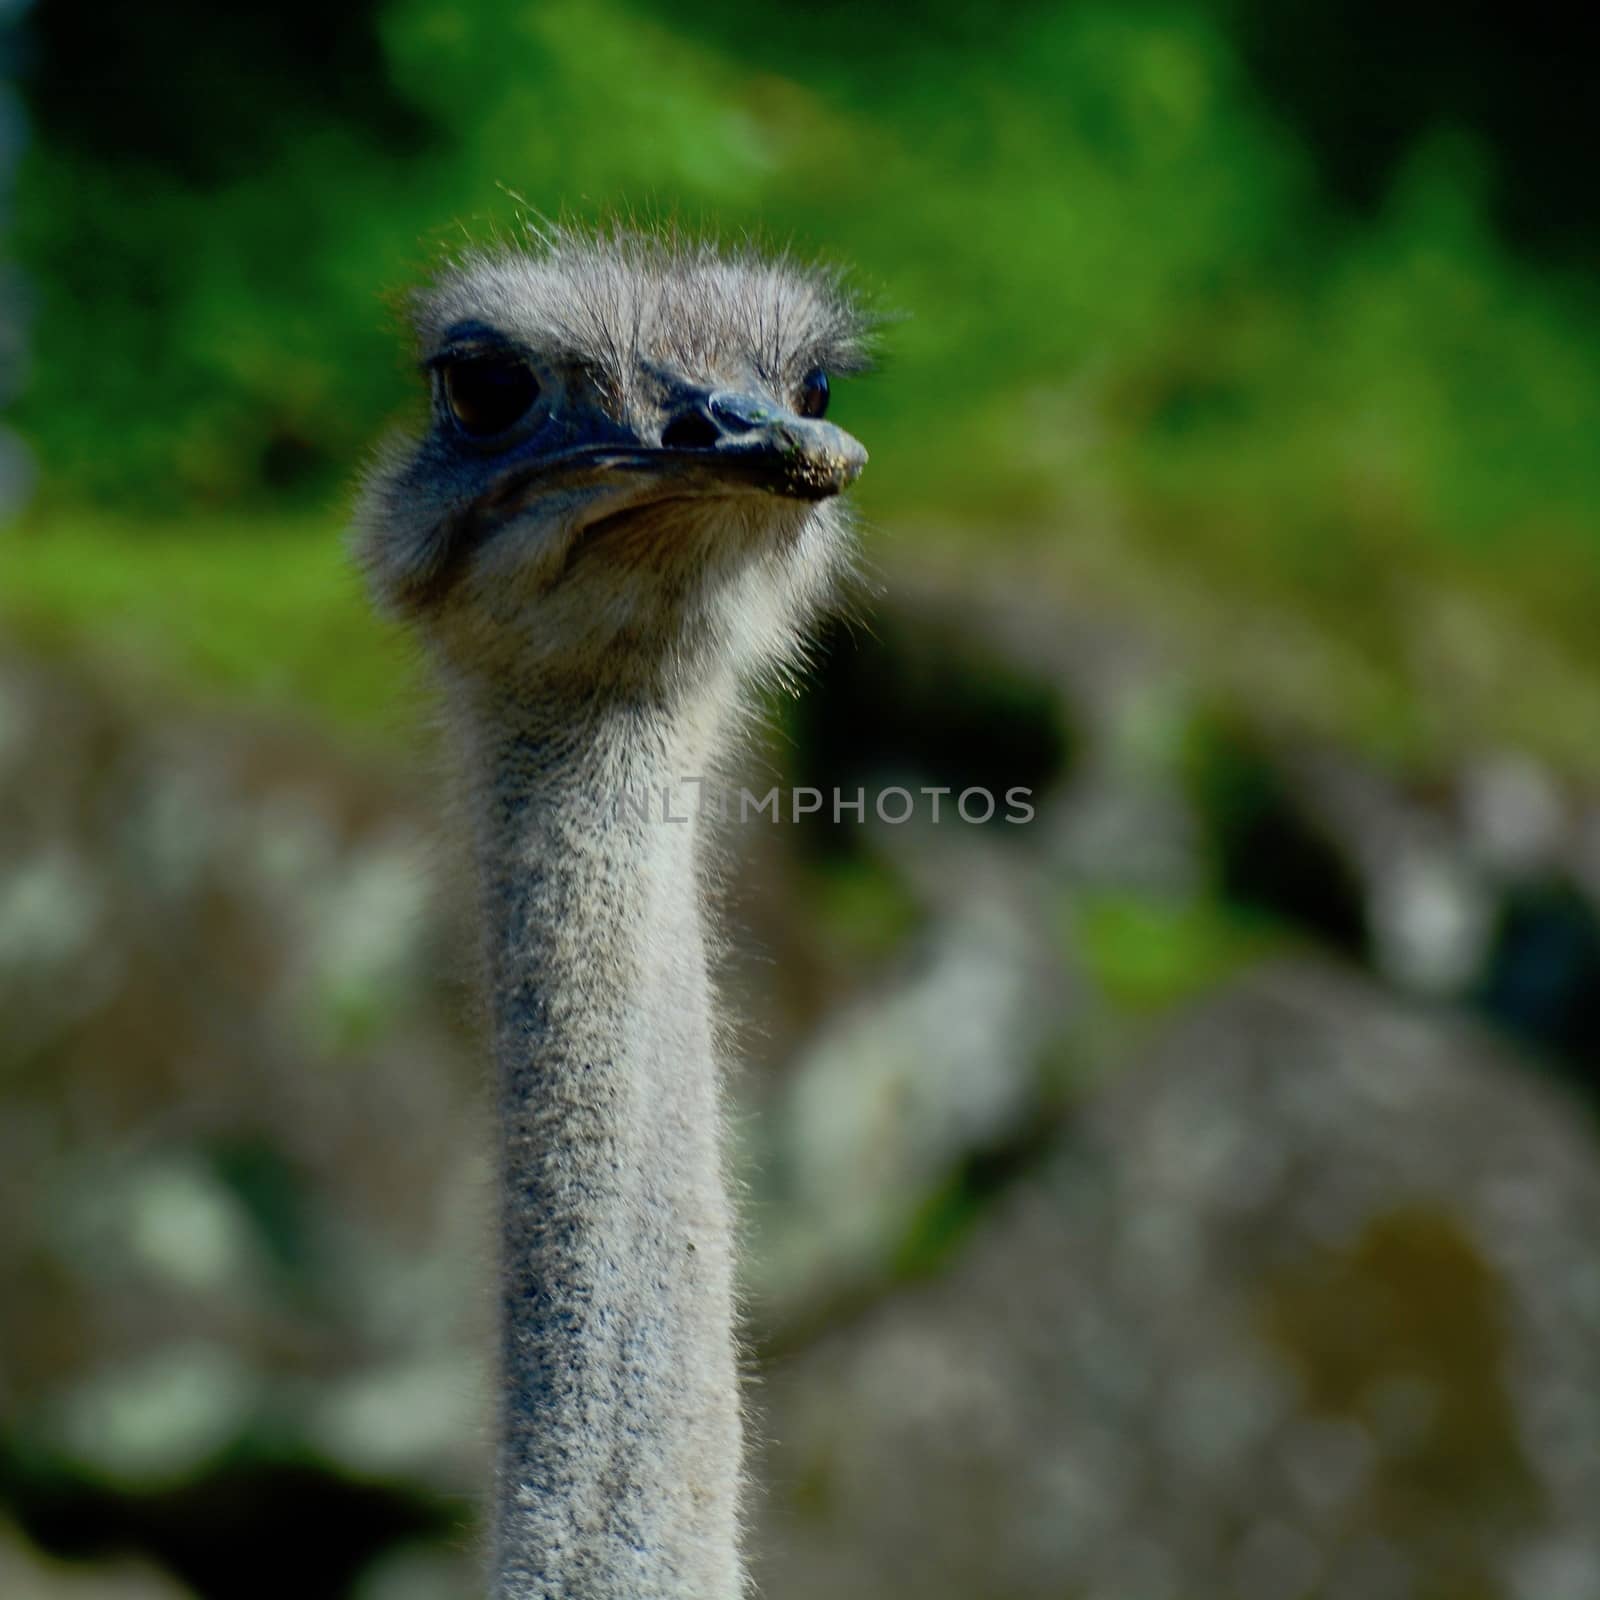 Portrait of a common ostrich (Struthio camelus). This is a large flightless bird native to certain large areas of Africa. by Marshalkina